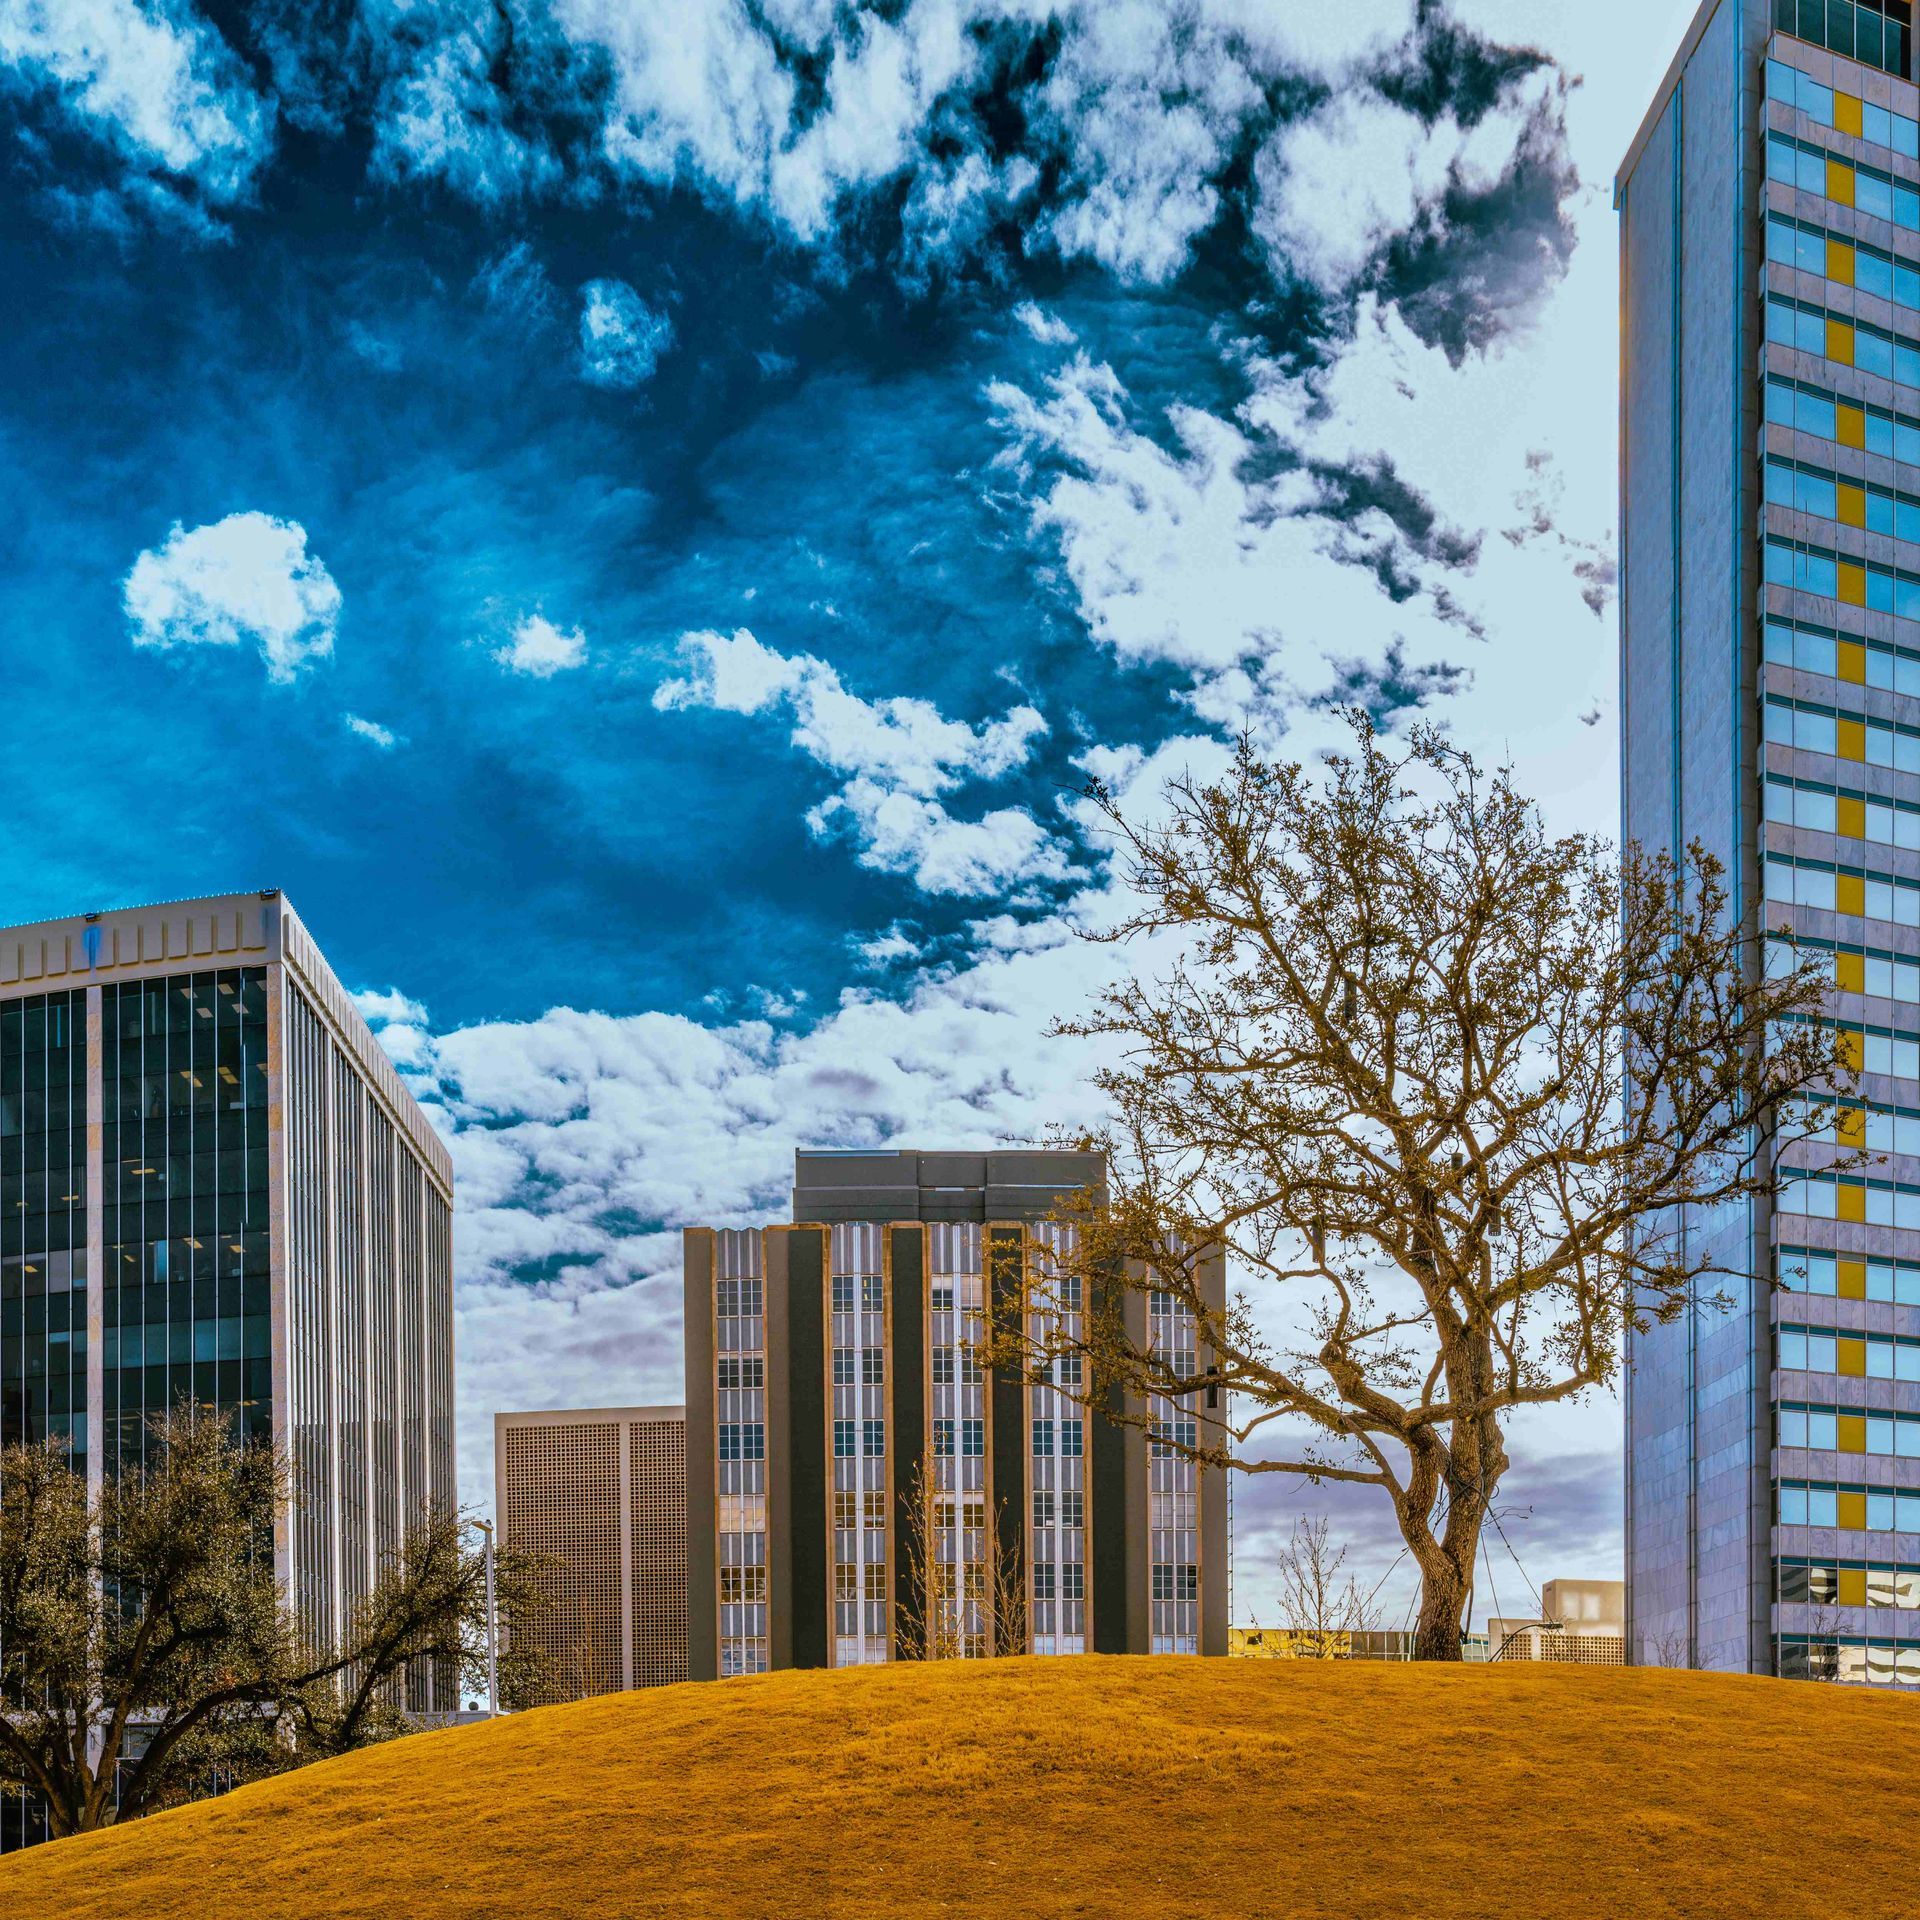 Photograph of buildings and sky